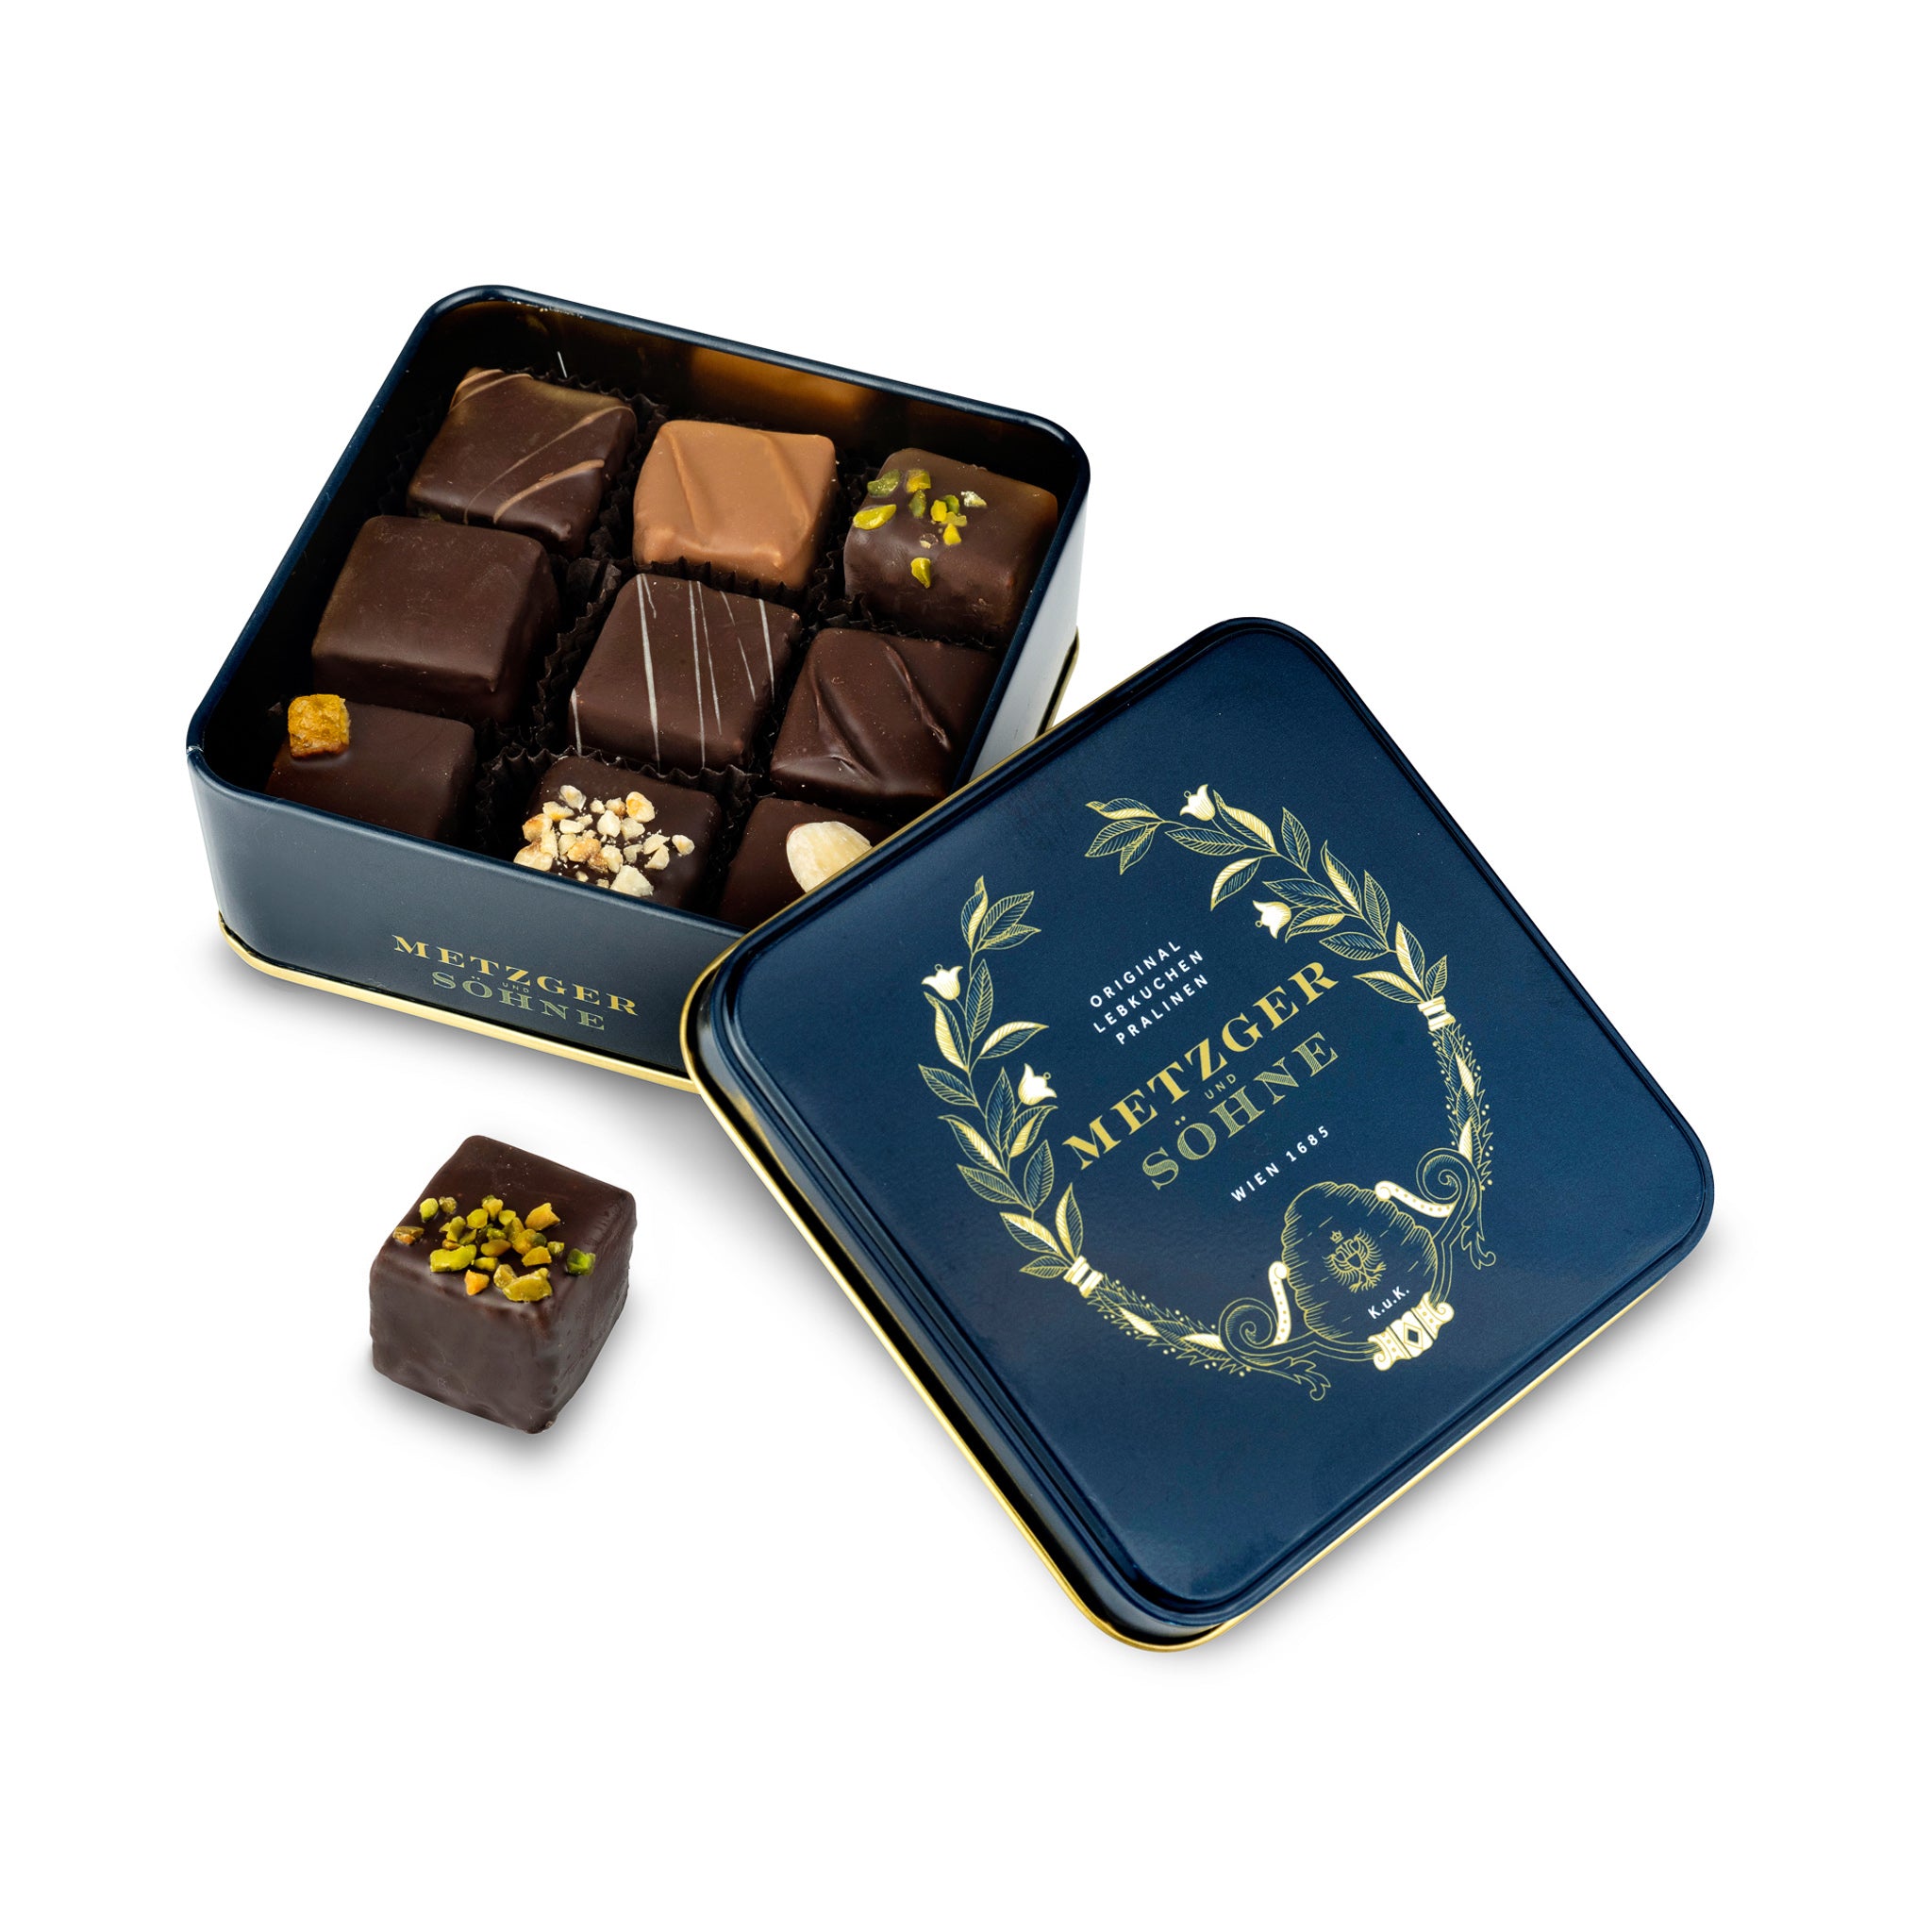 Metzger signature tin in navy blue filled with 9 different Lebkuchen 'honey cake' pralines filled with marzipan, fruits, nuts or jelly, encased in chocolate.